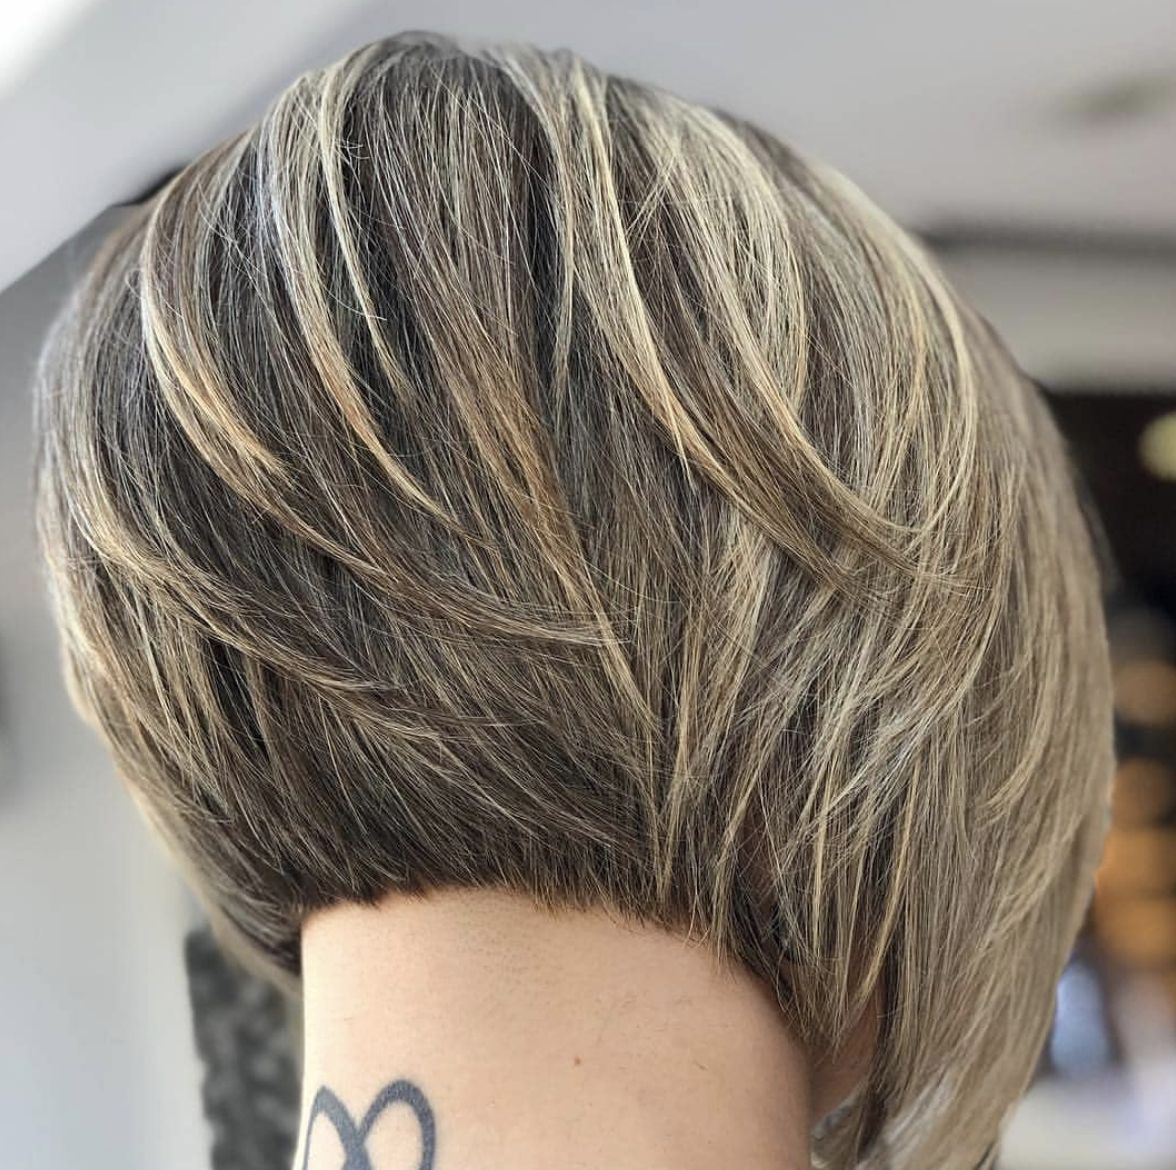 Pin On Bobs Regarding Well Known Graduated Angled Bob Hairstyles (View 16 of 20)